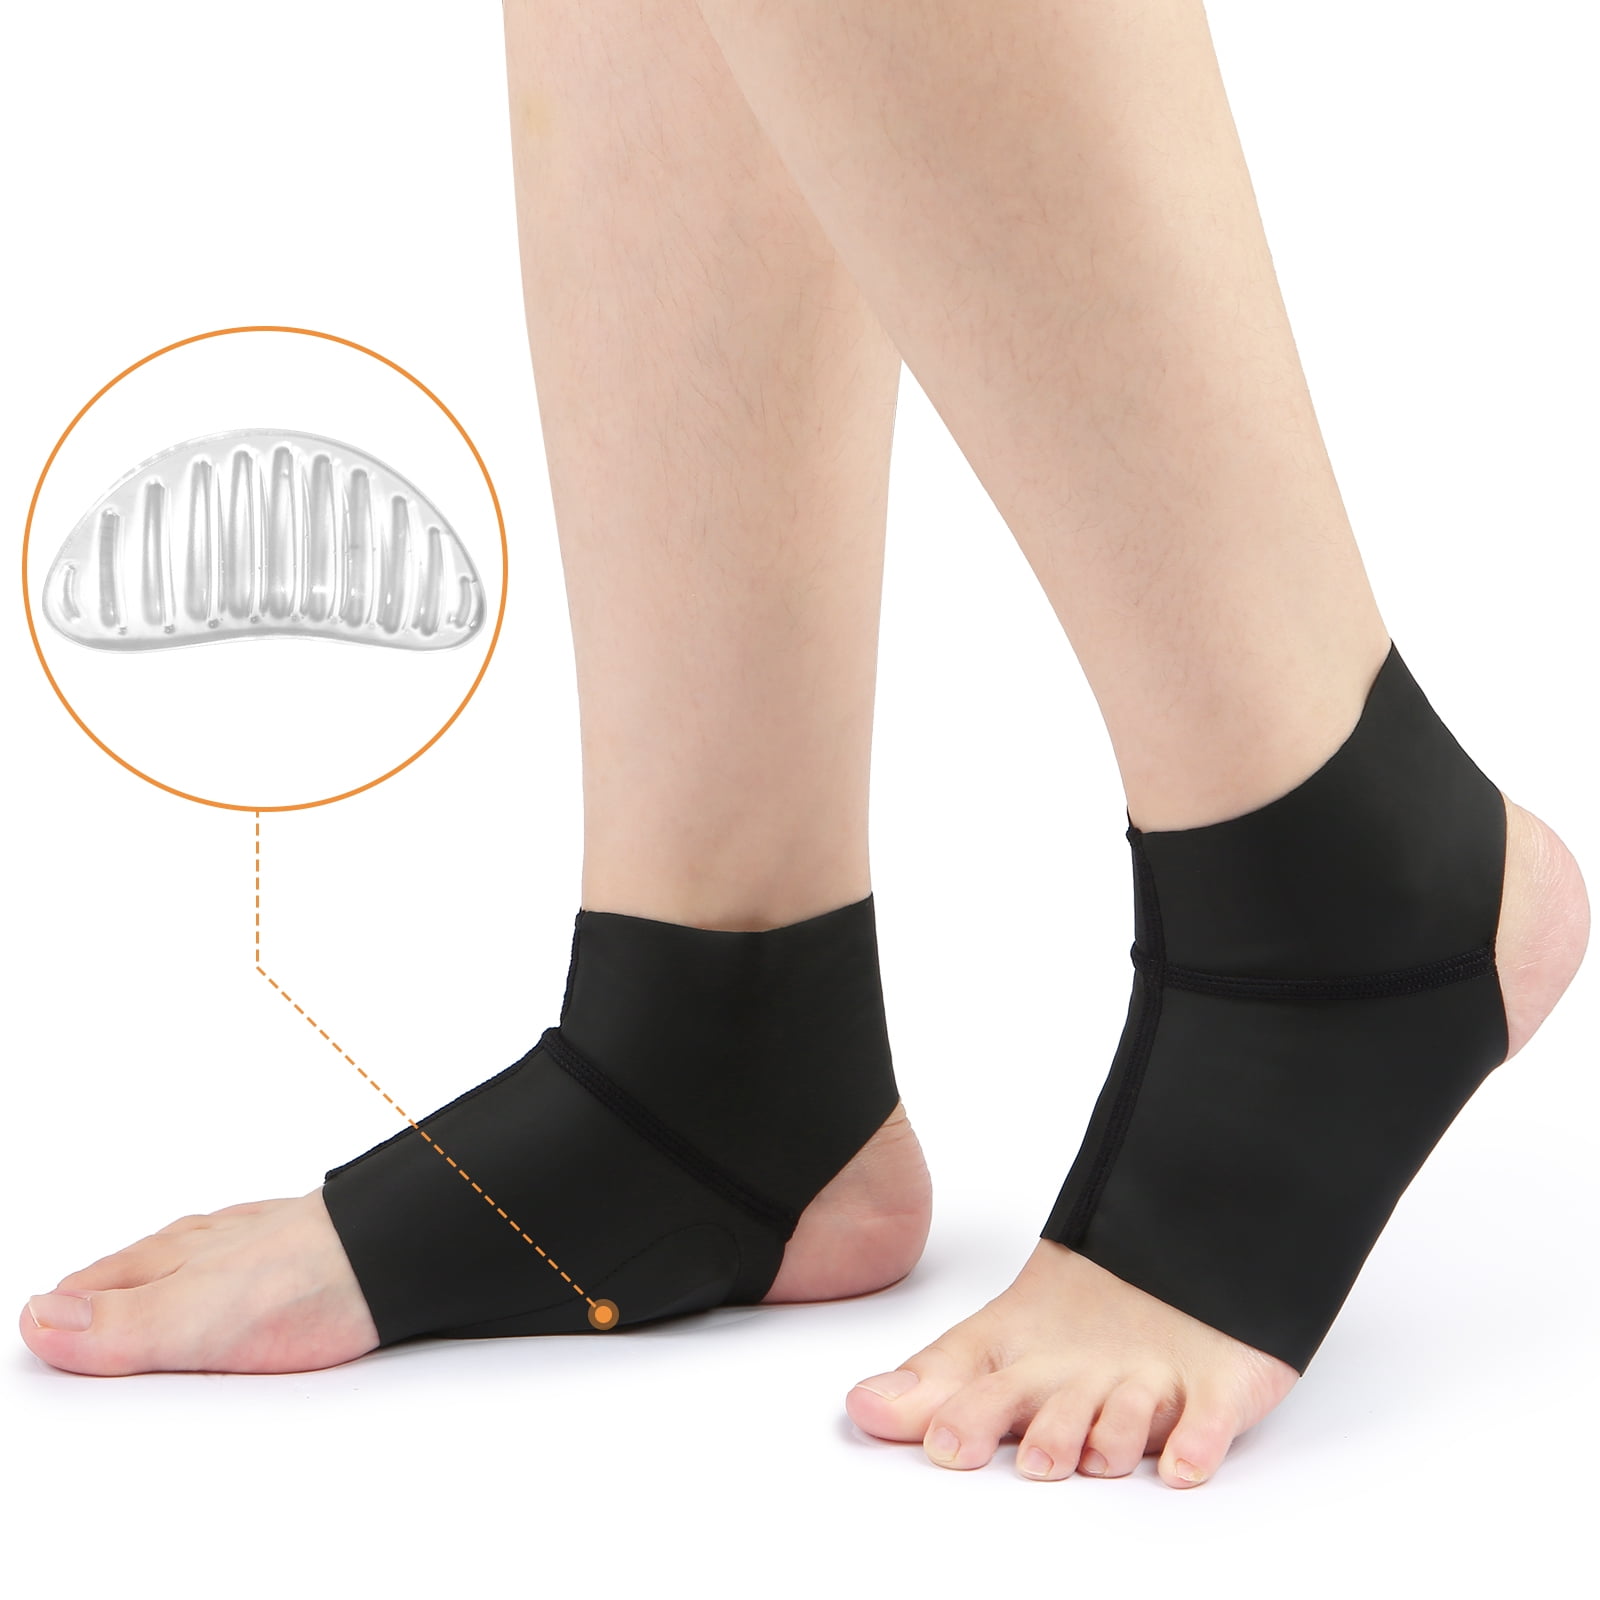 Drop Orthotic Brace Adjustable Foot Orthosis Stabilizer Pain Relief  Breathable for Plantar Fasciitis/Heel/Ankle/Arch Foot Pain - AliExpress